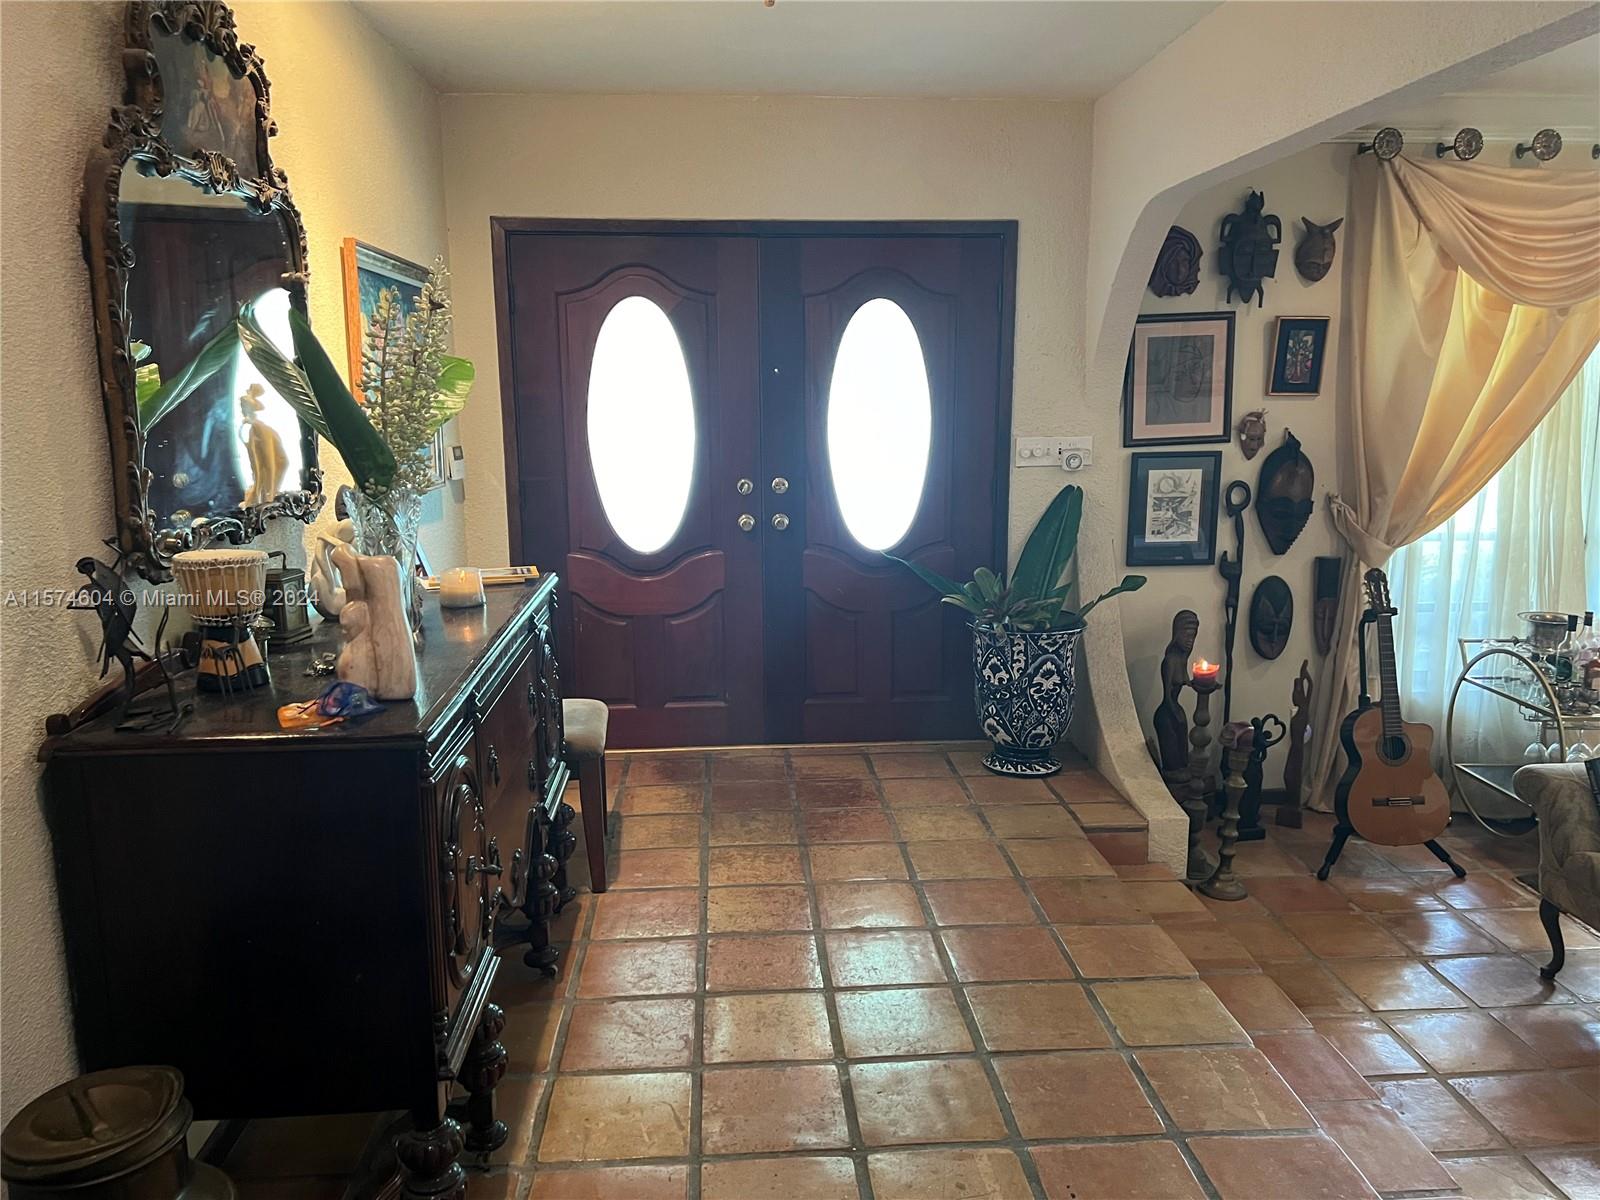 10300 SW 125th St, Miami, Florida 33176, 5 Bedrooms Bedrooms, ,3 BathroomsBathrooms,Residential,For Sale,10300 SW 125th St,A11574604